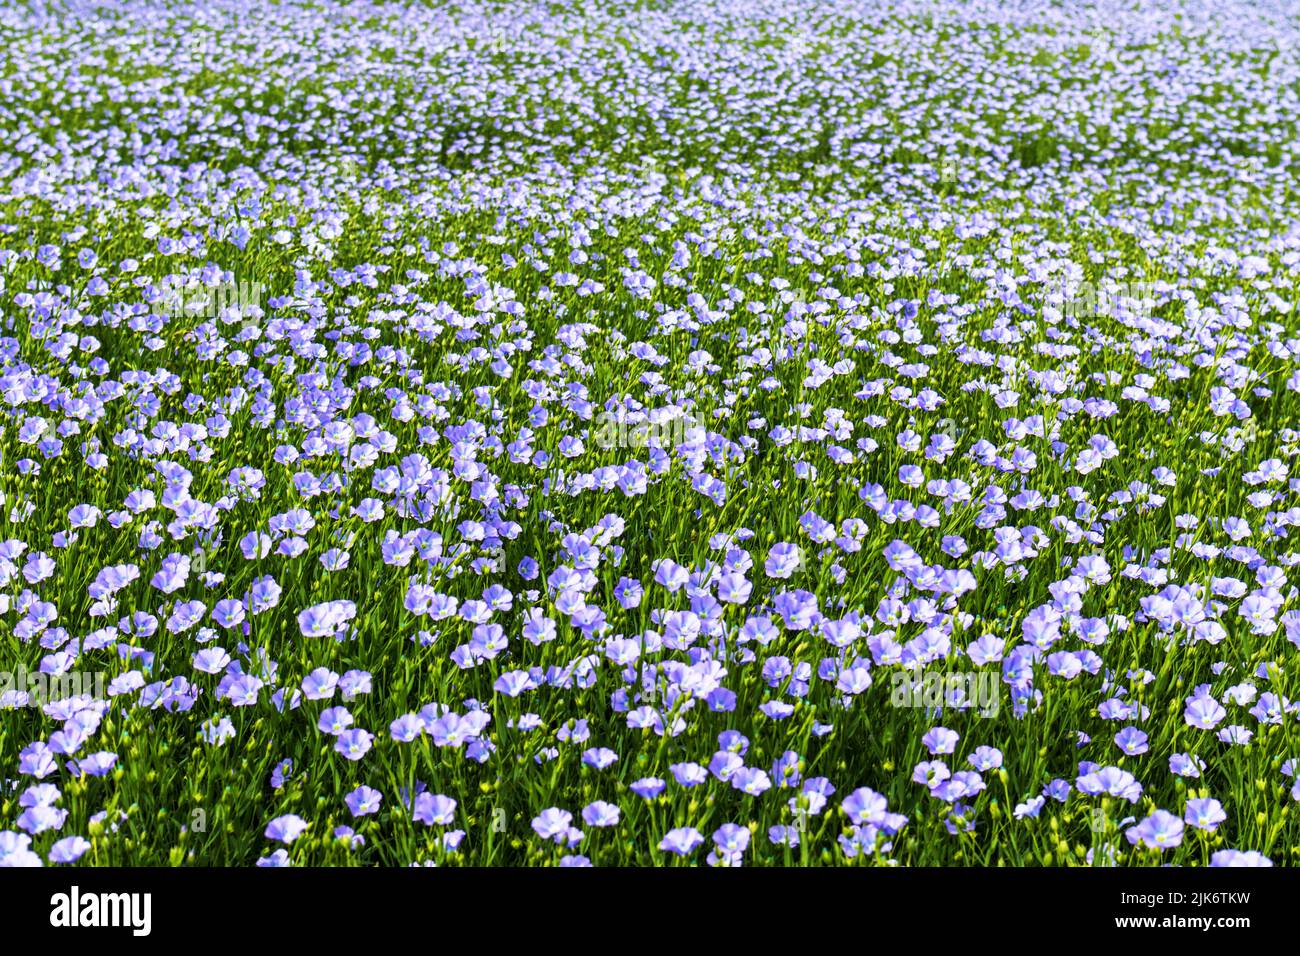 A meadow full of small blue flowers on a green background Stock Photo